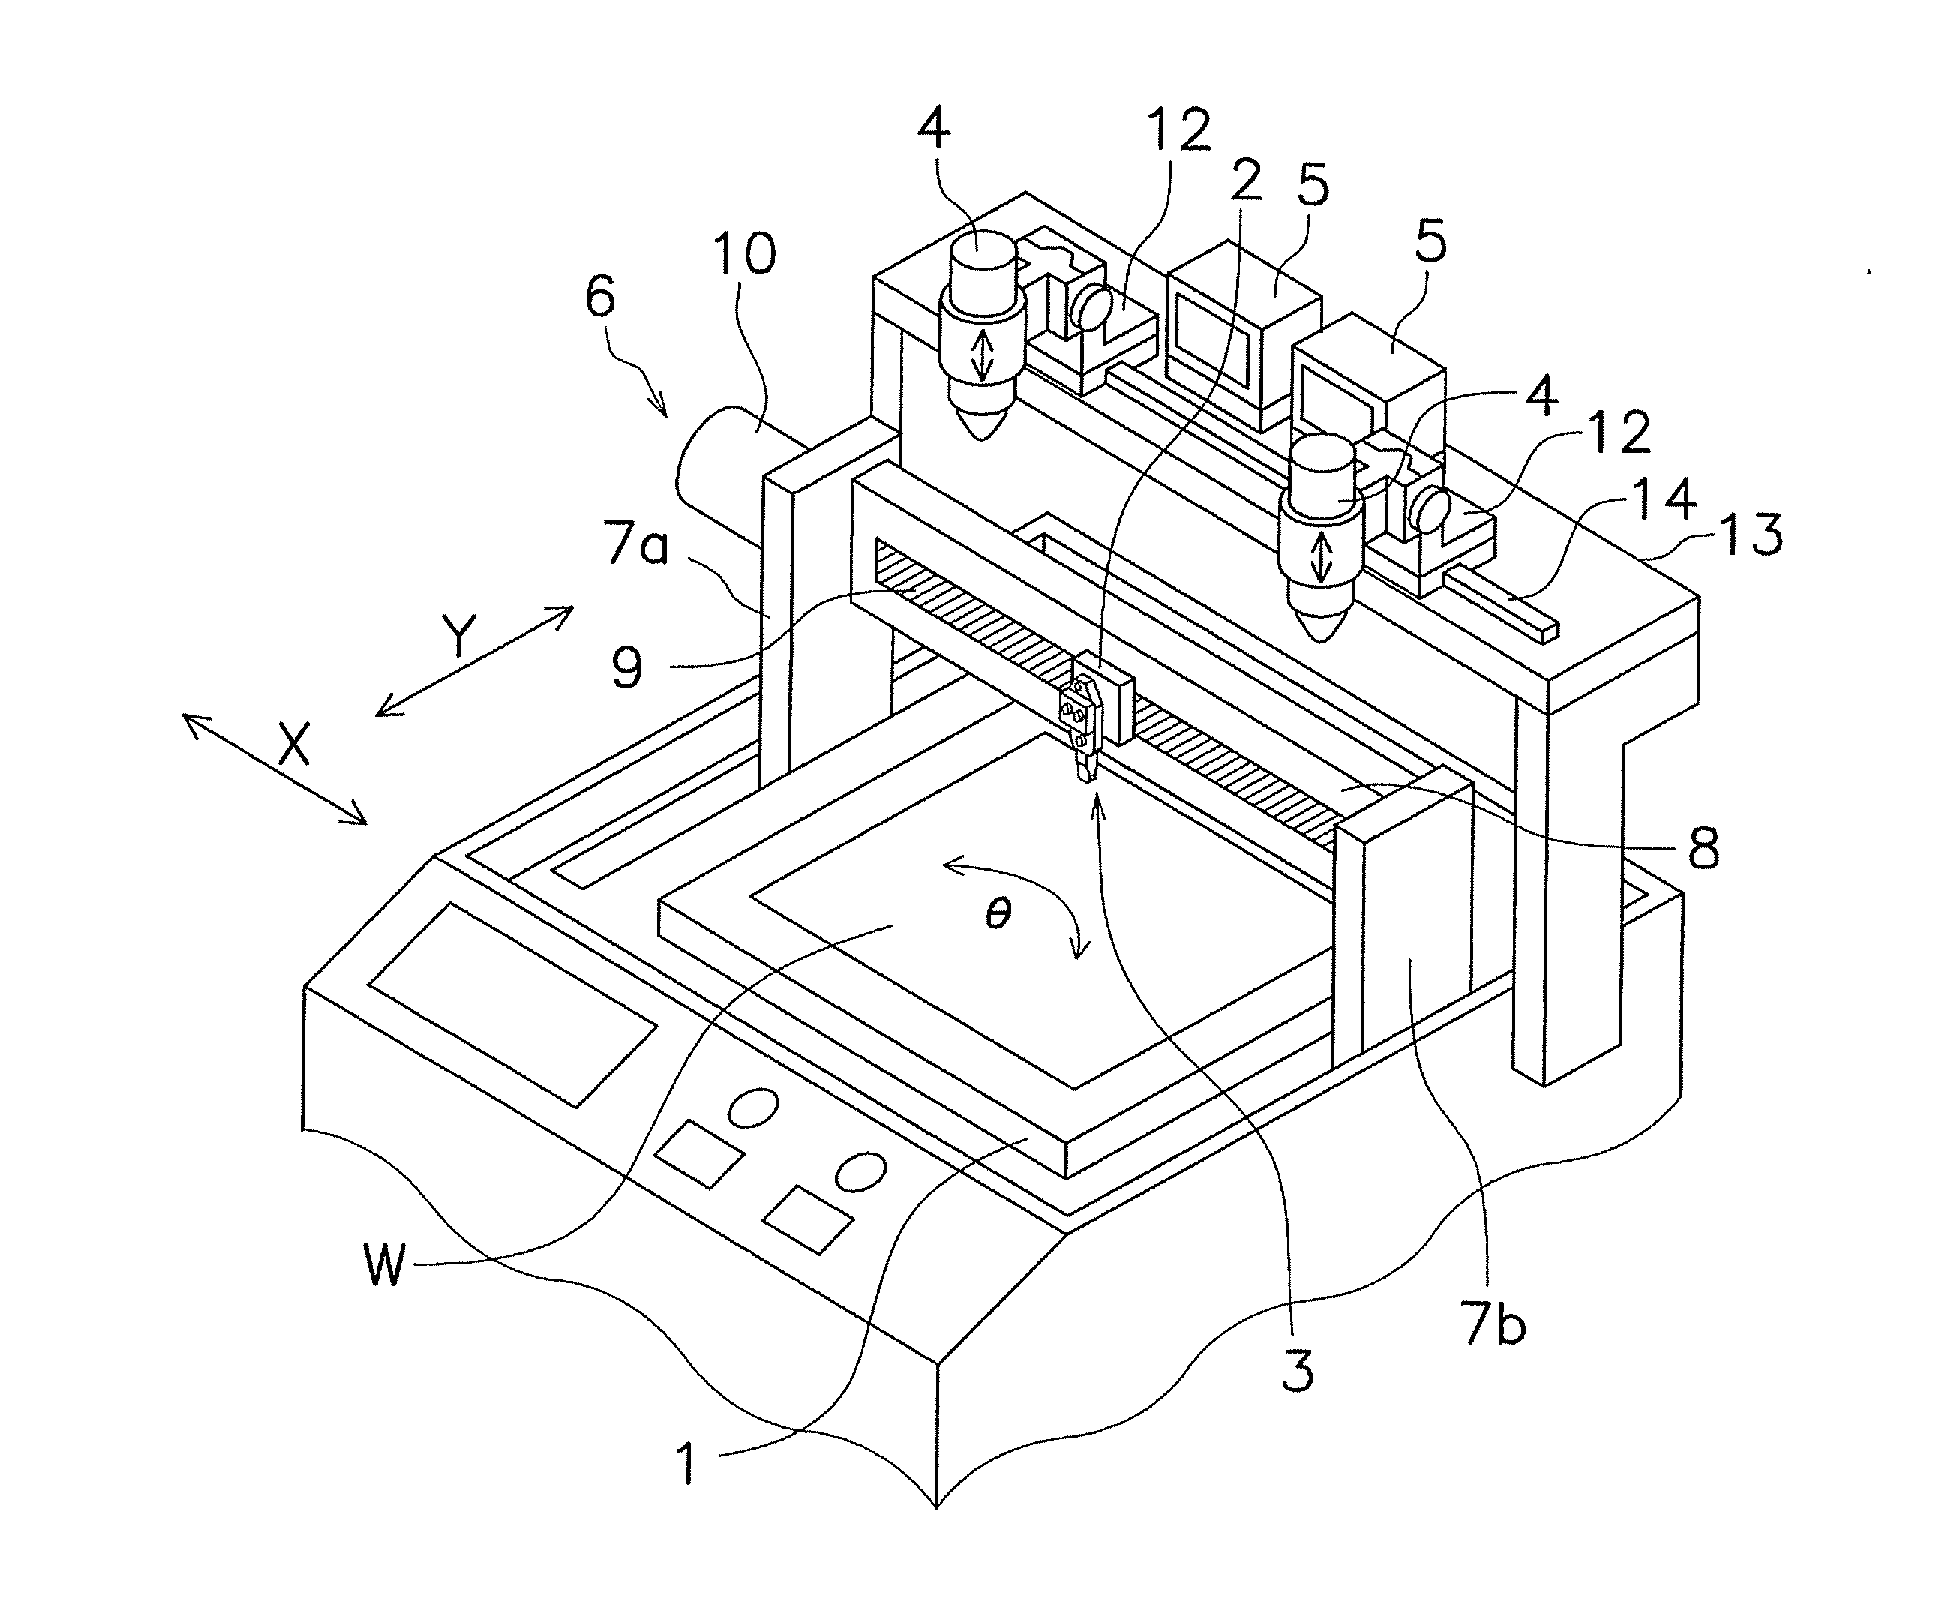 Groove machining tool for use with a thin-film solar cell